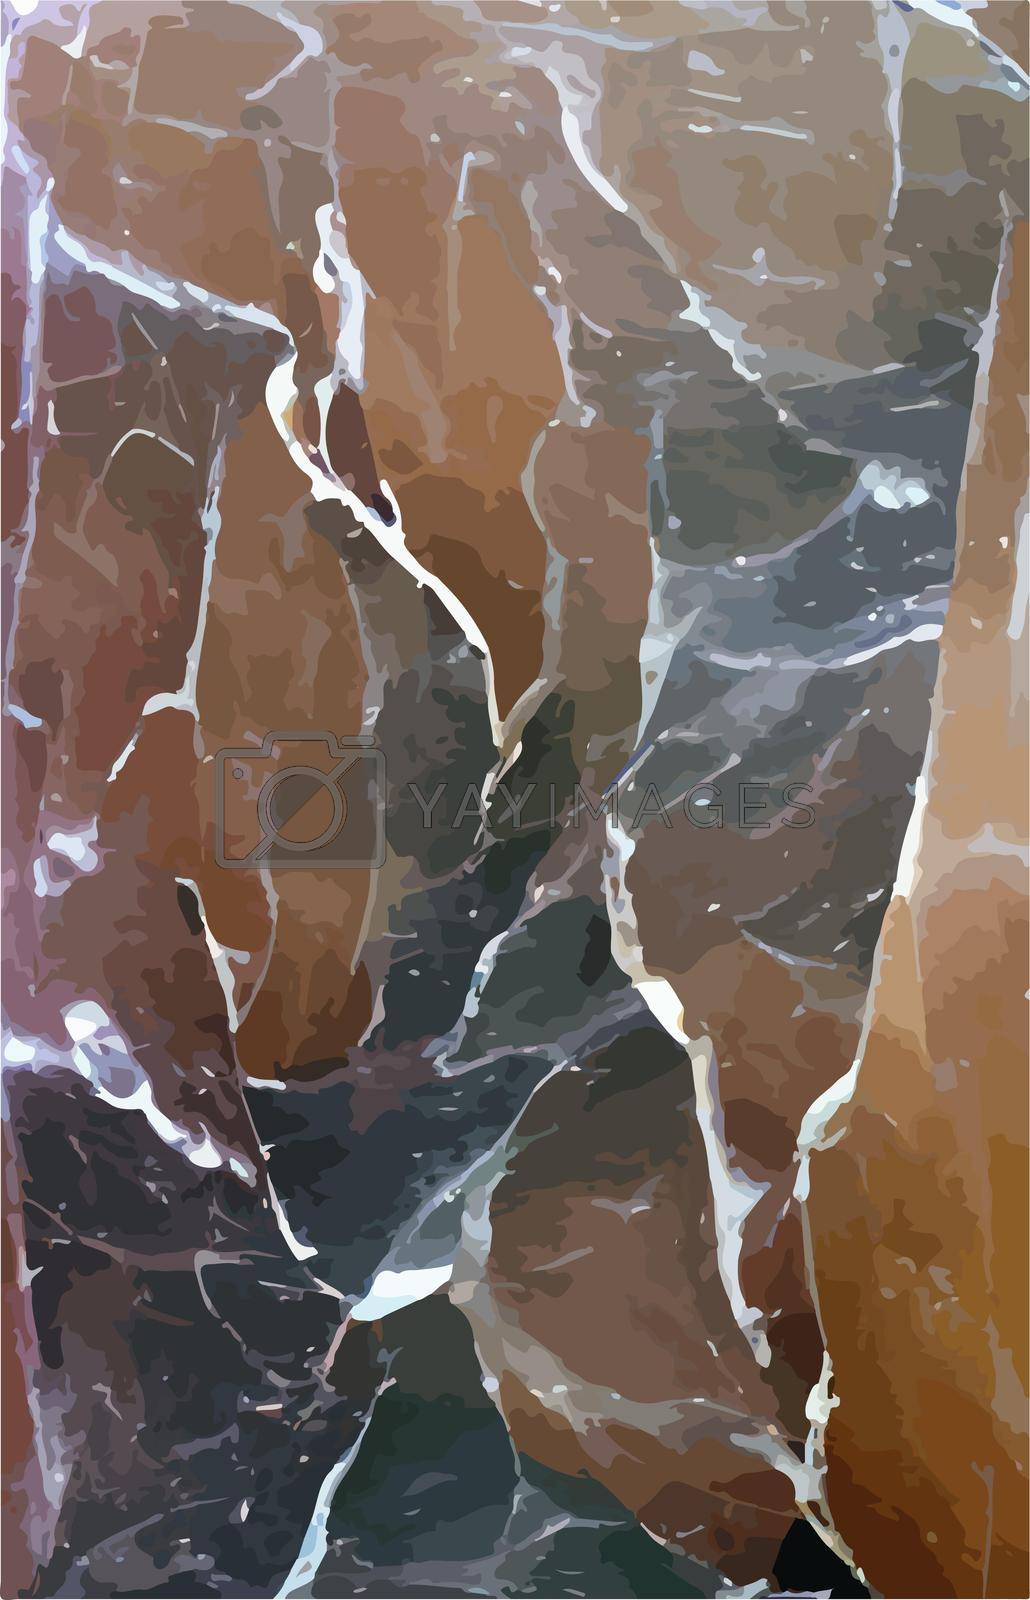 Royalty free image of close-up colorful marble stone pattern for background by yilmazsavaskandag